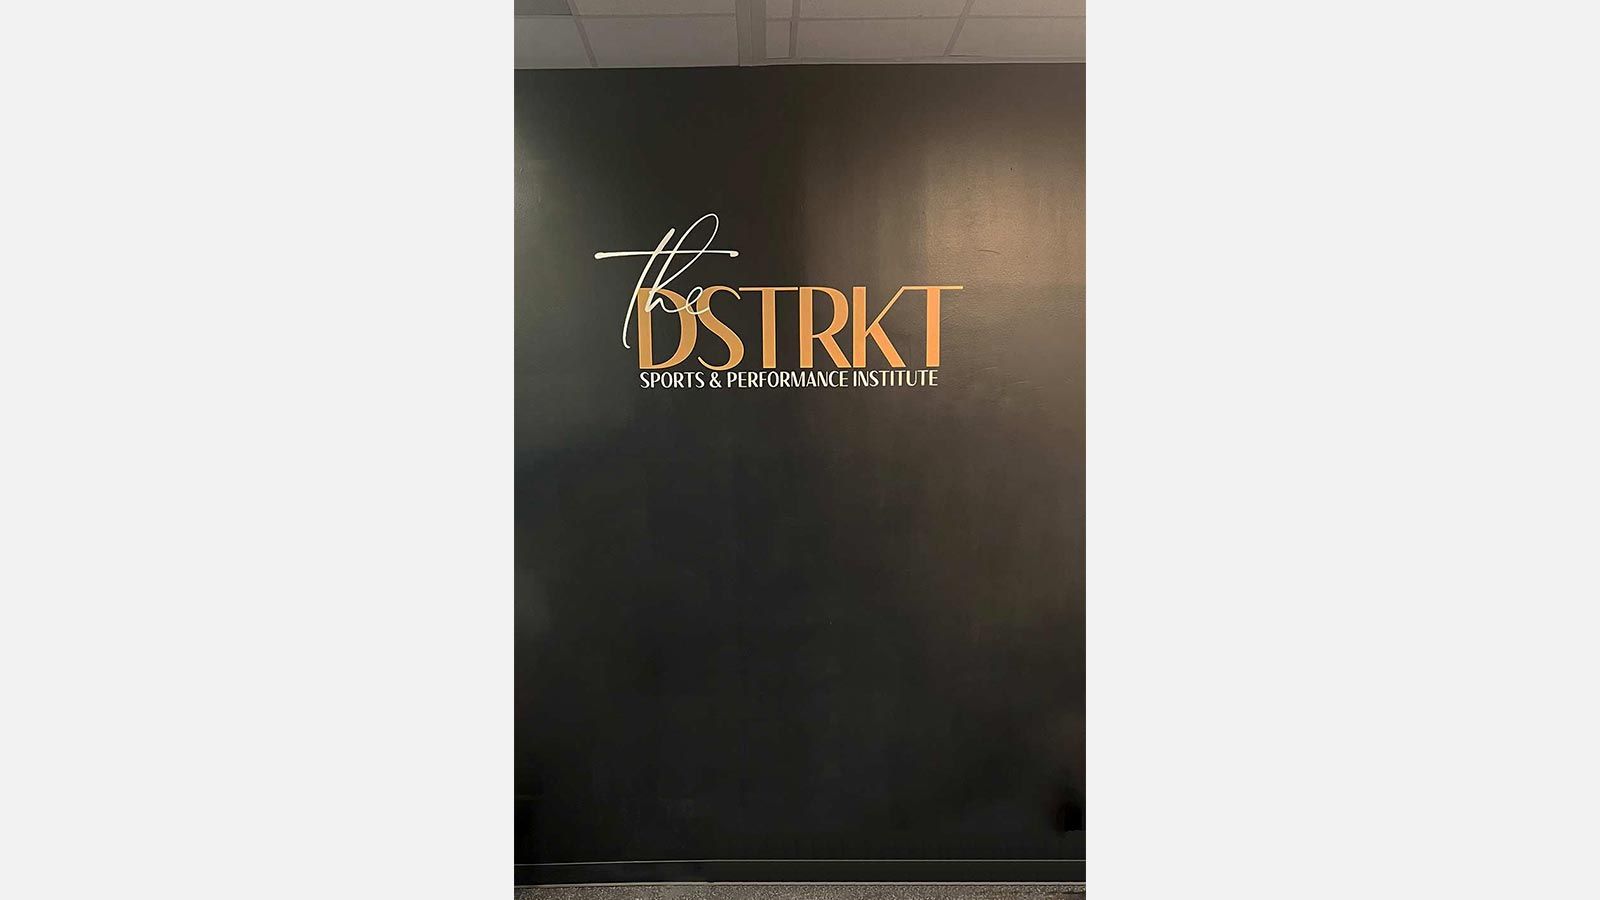 The DSTRKT custom decal attached to the wall